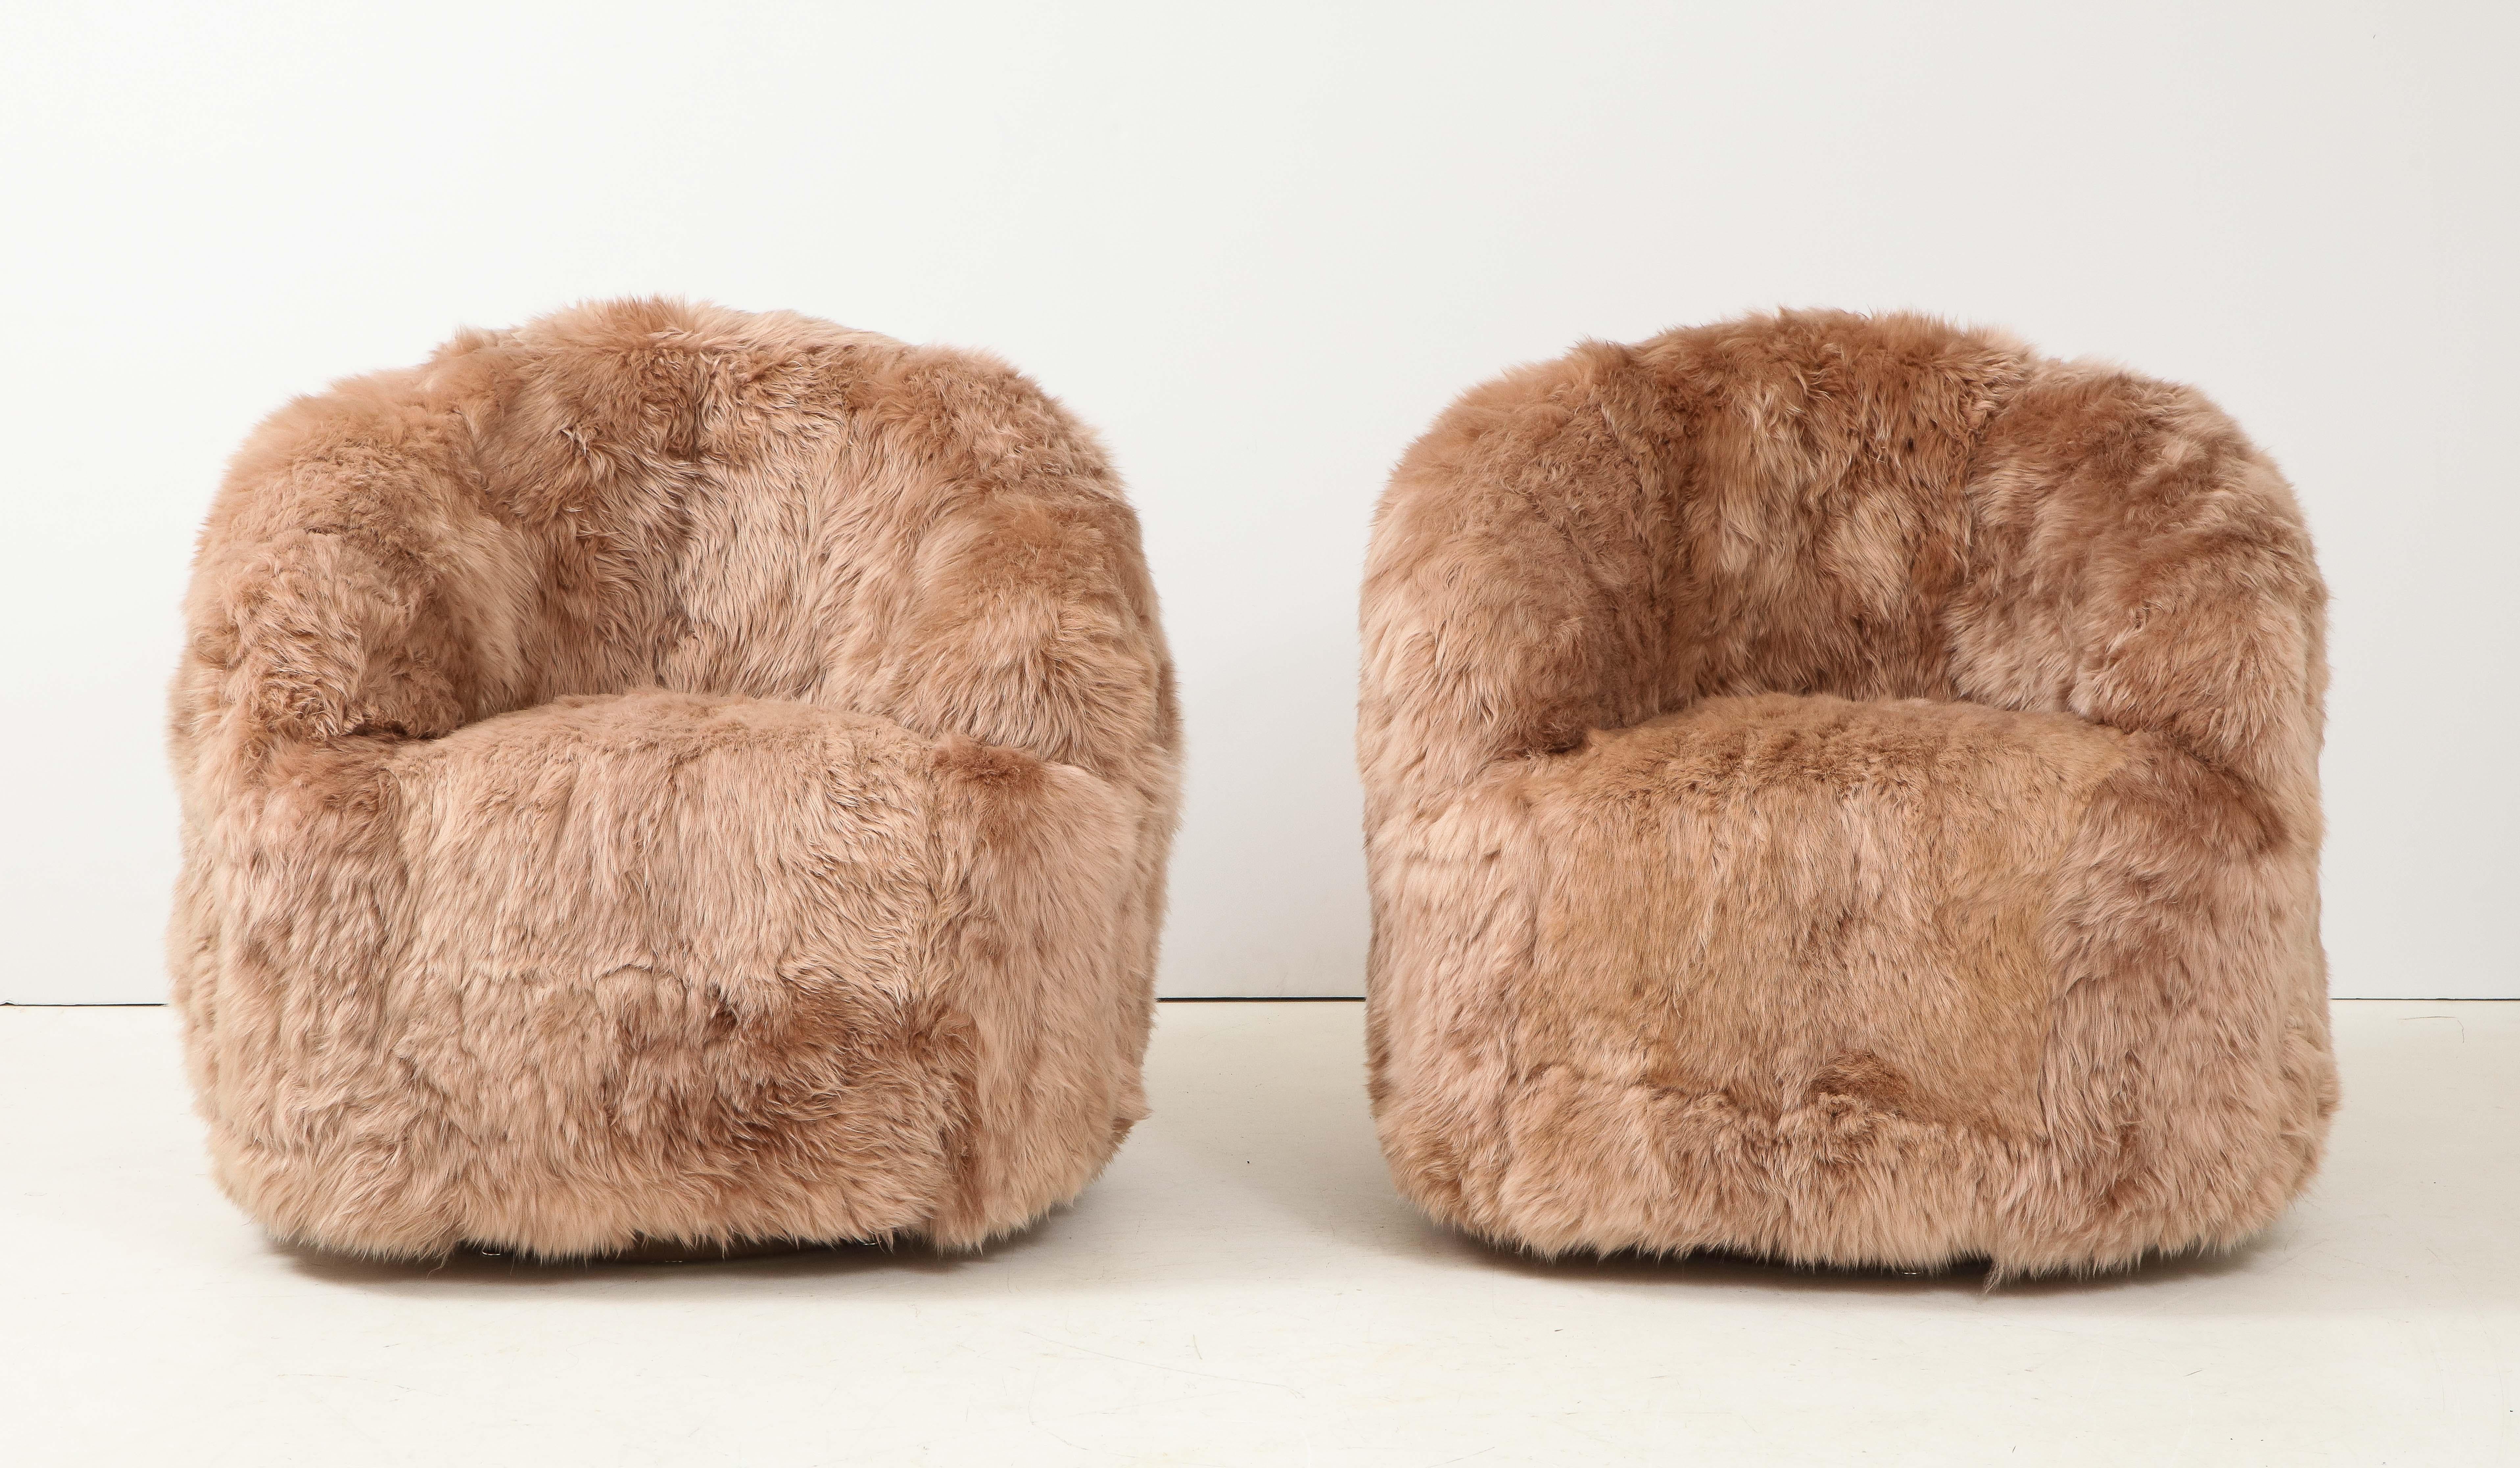 Pair of swivel club chairs custom upholstered in a sandstone / dusk colored sheepskin. Bases covered in a light brown leather. Chairs provide ample seating and are extremely comfortable. New Padding and upholstery.